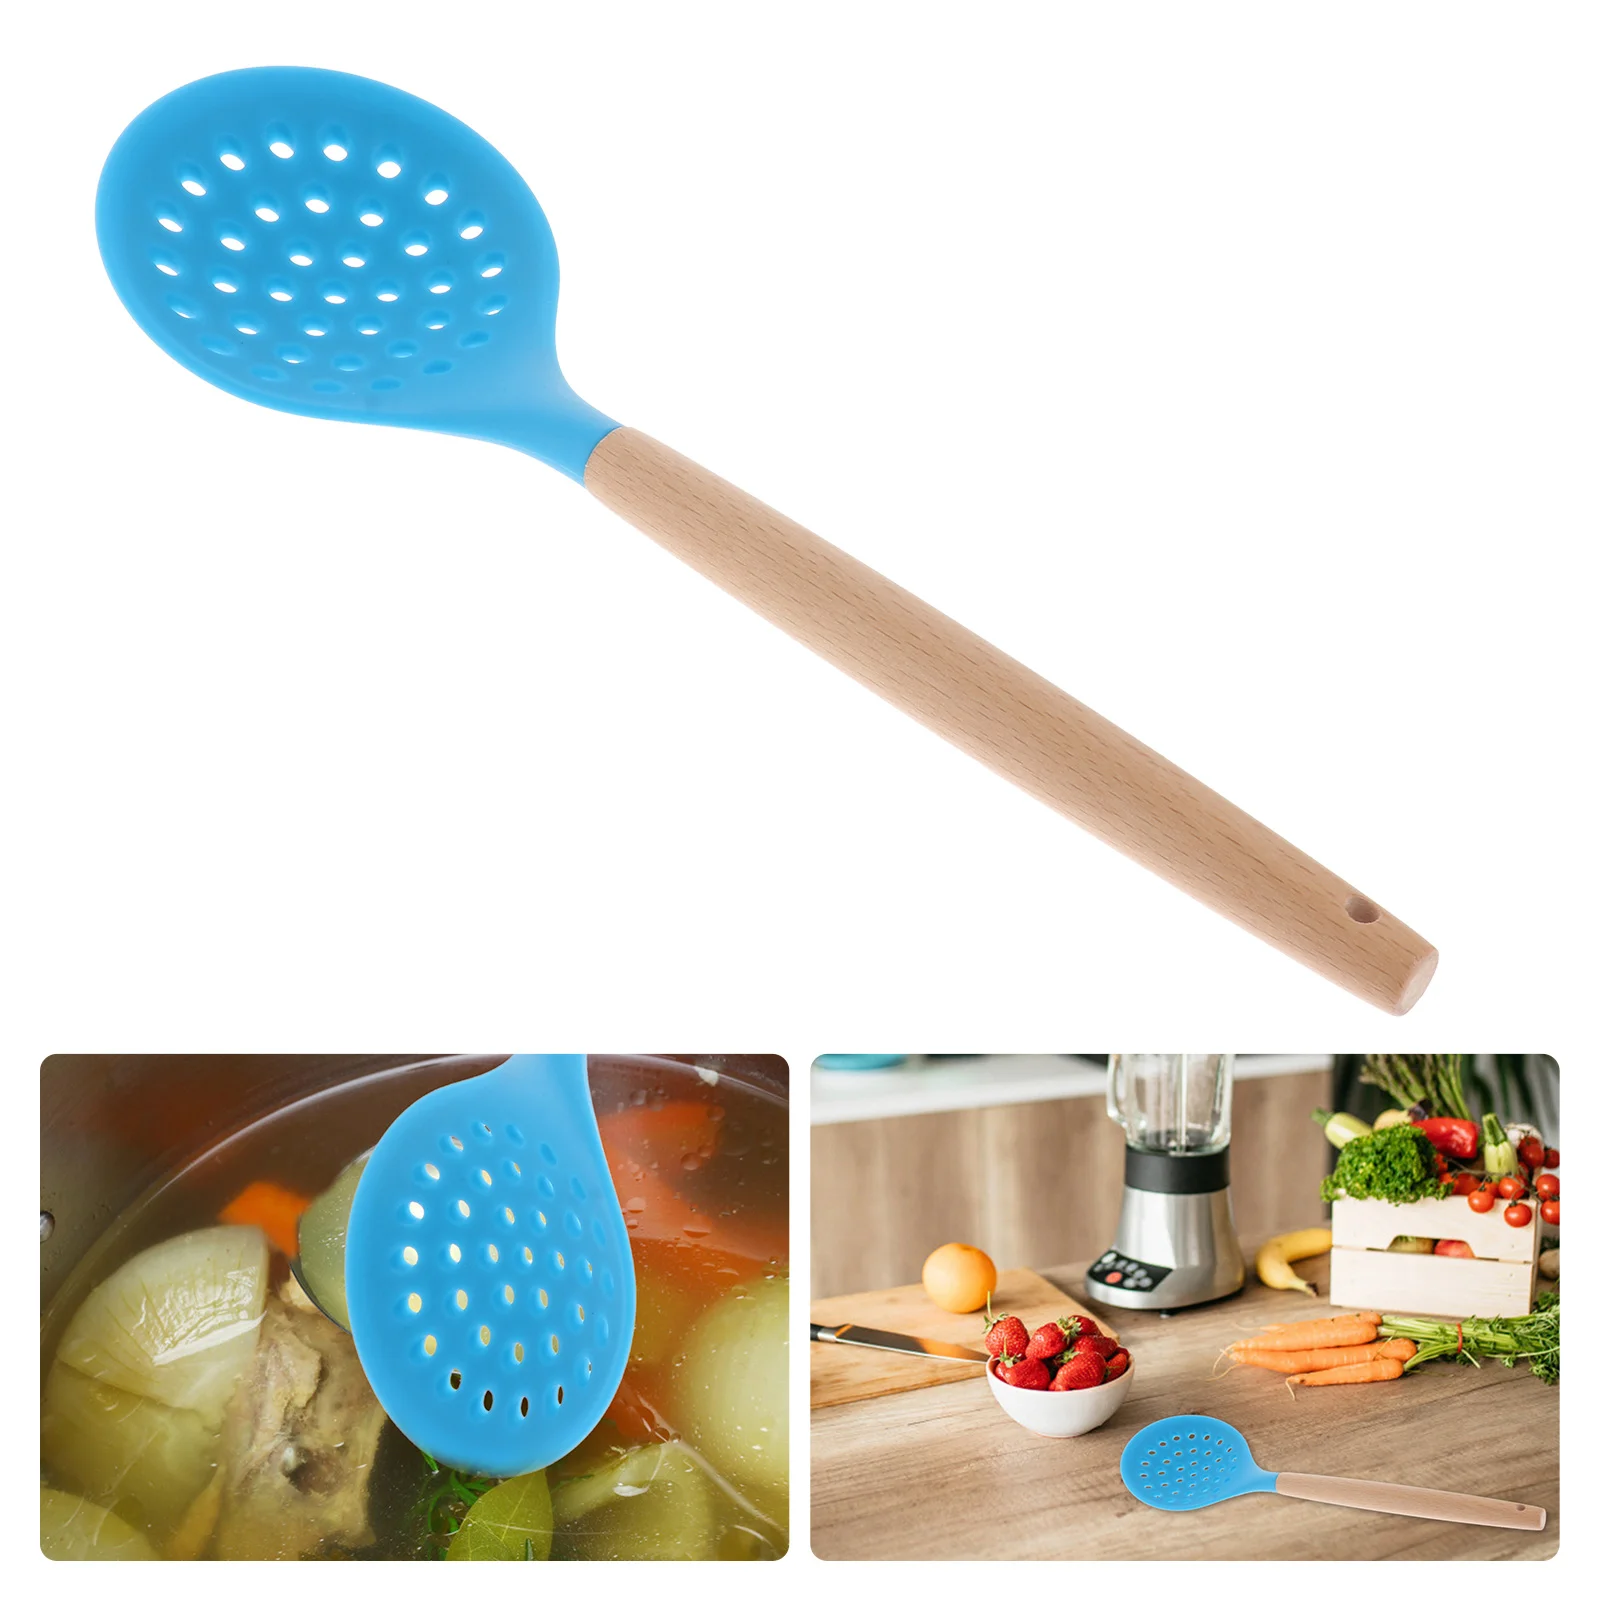 

Spoon Strainer Skimmer Slotted Silicone Ladle Scoop Baking Stick Colander Pot Hot Non Kitchen Soup Fine Mesh Soy Filter Scoops